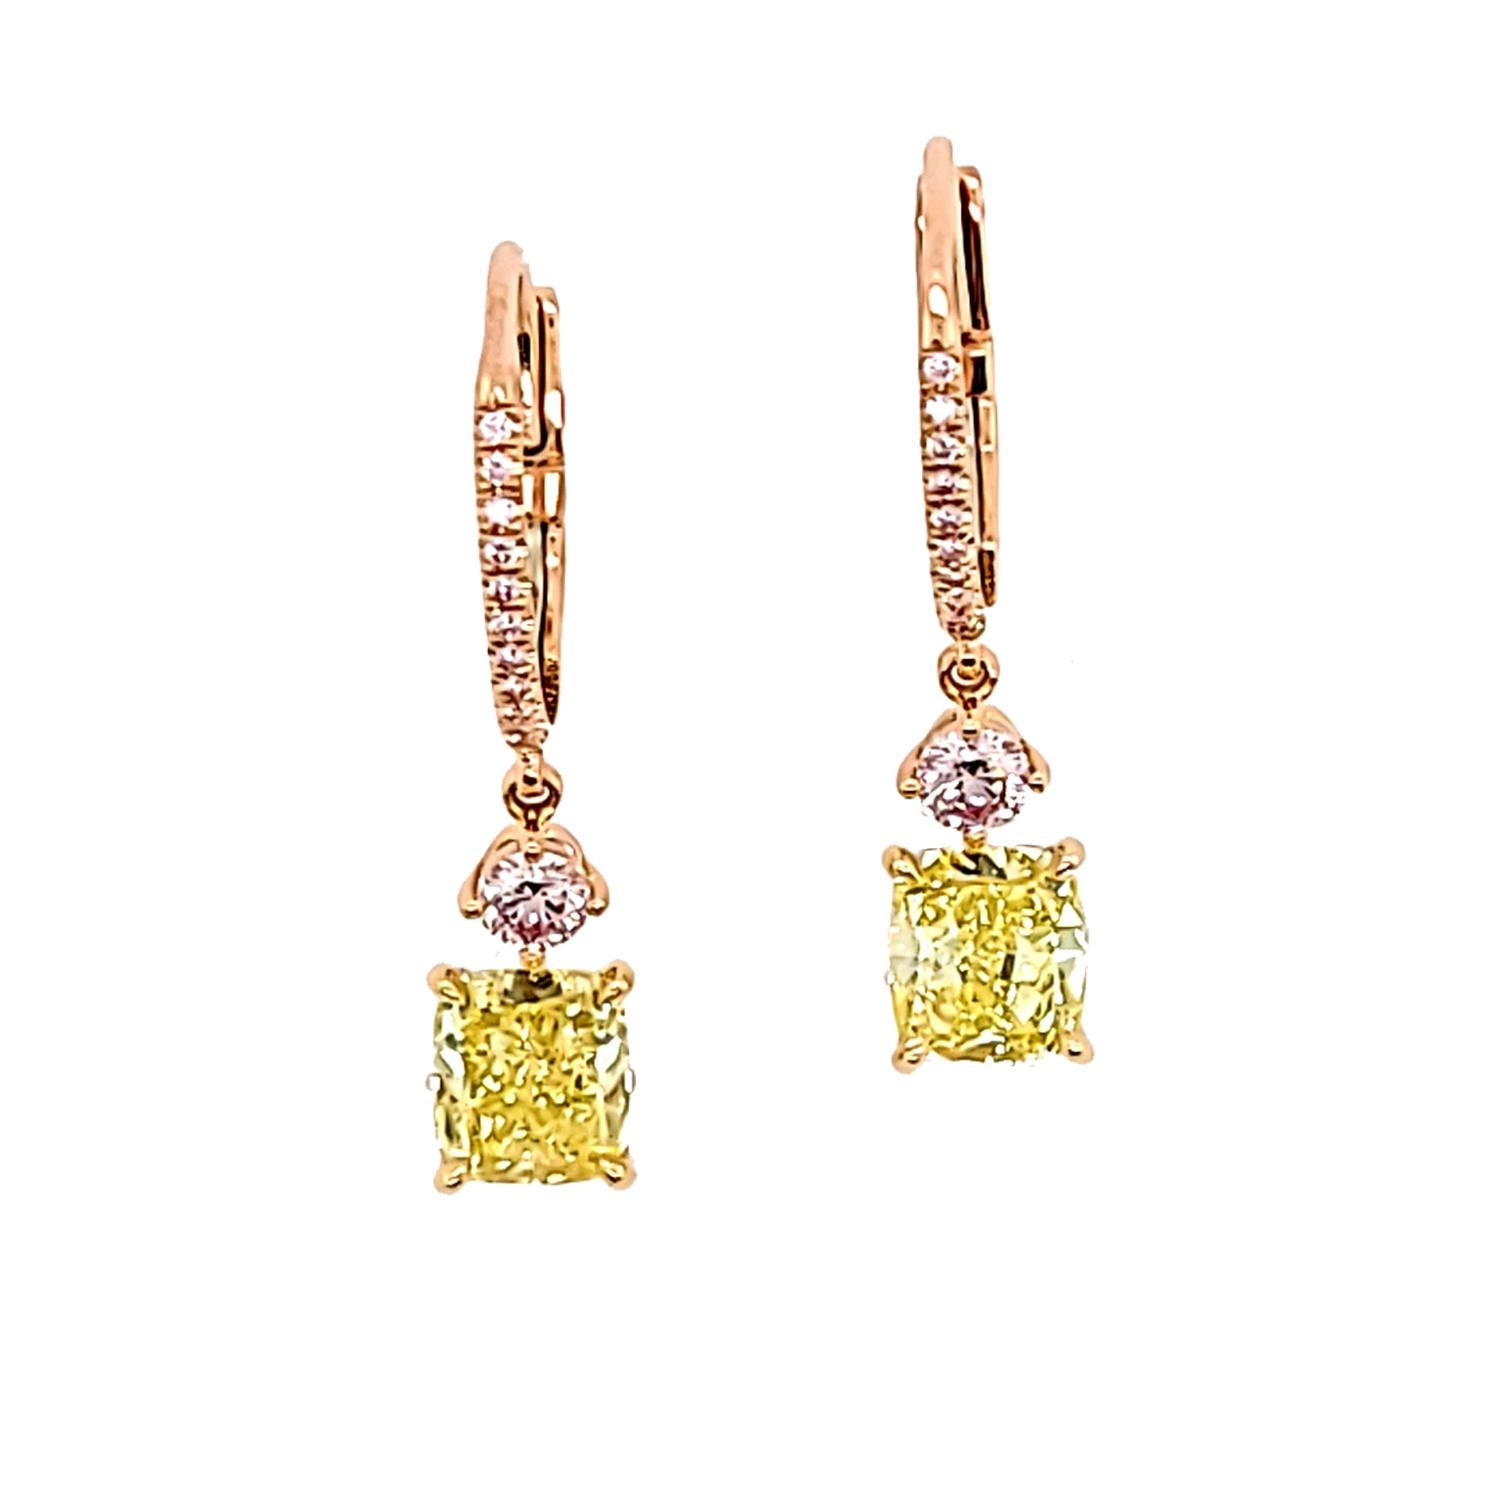 Make a statement with these stunning handmade drop earrings! These earrings feature two fancy intense yellow cushions, weighing 2.52 carats total, set in 18k yellow gold. The cushions are certified by the esteemed GIA, with unique numbers 2165301327